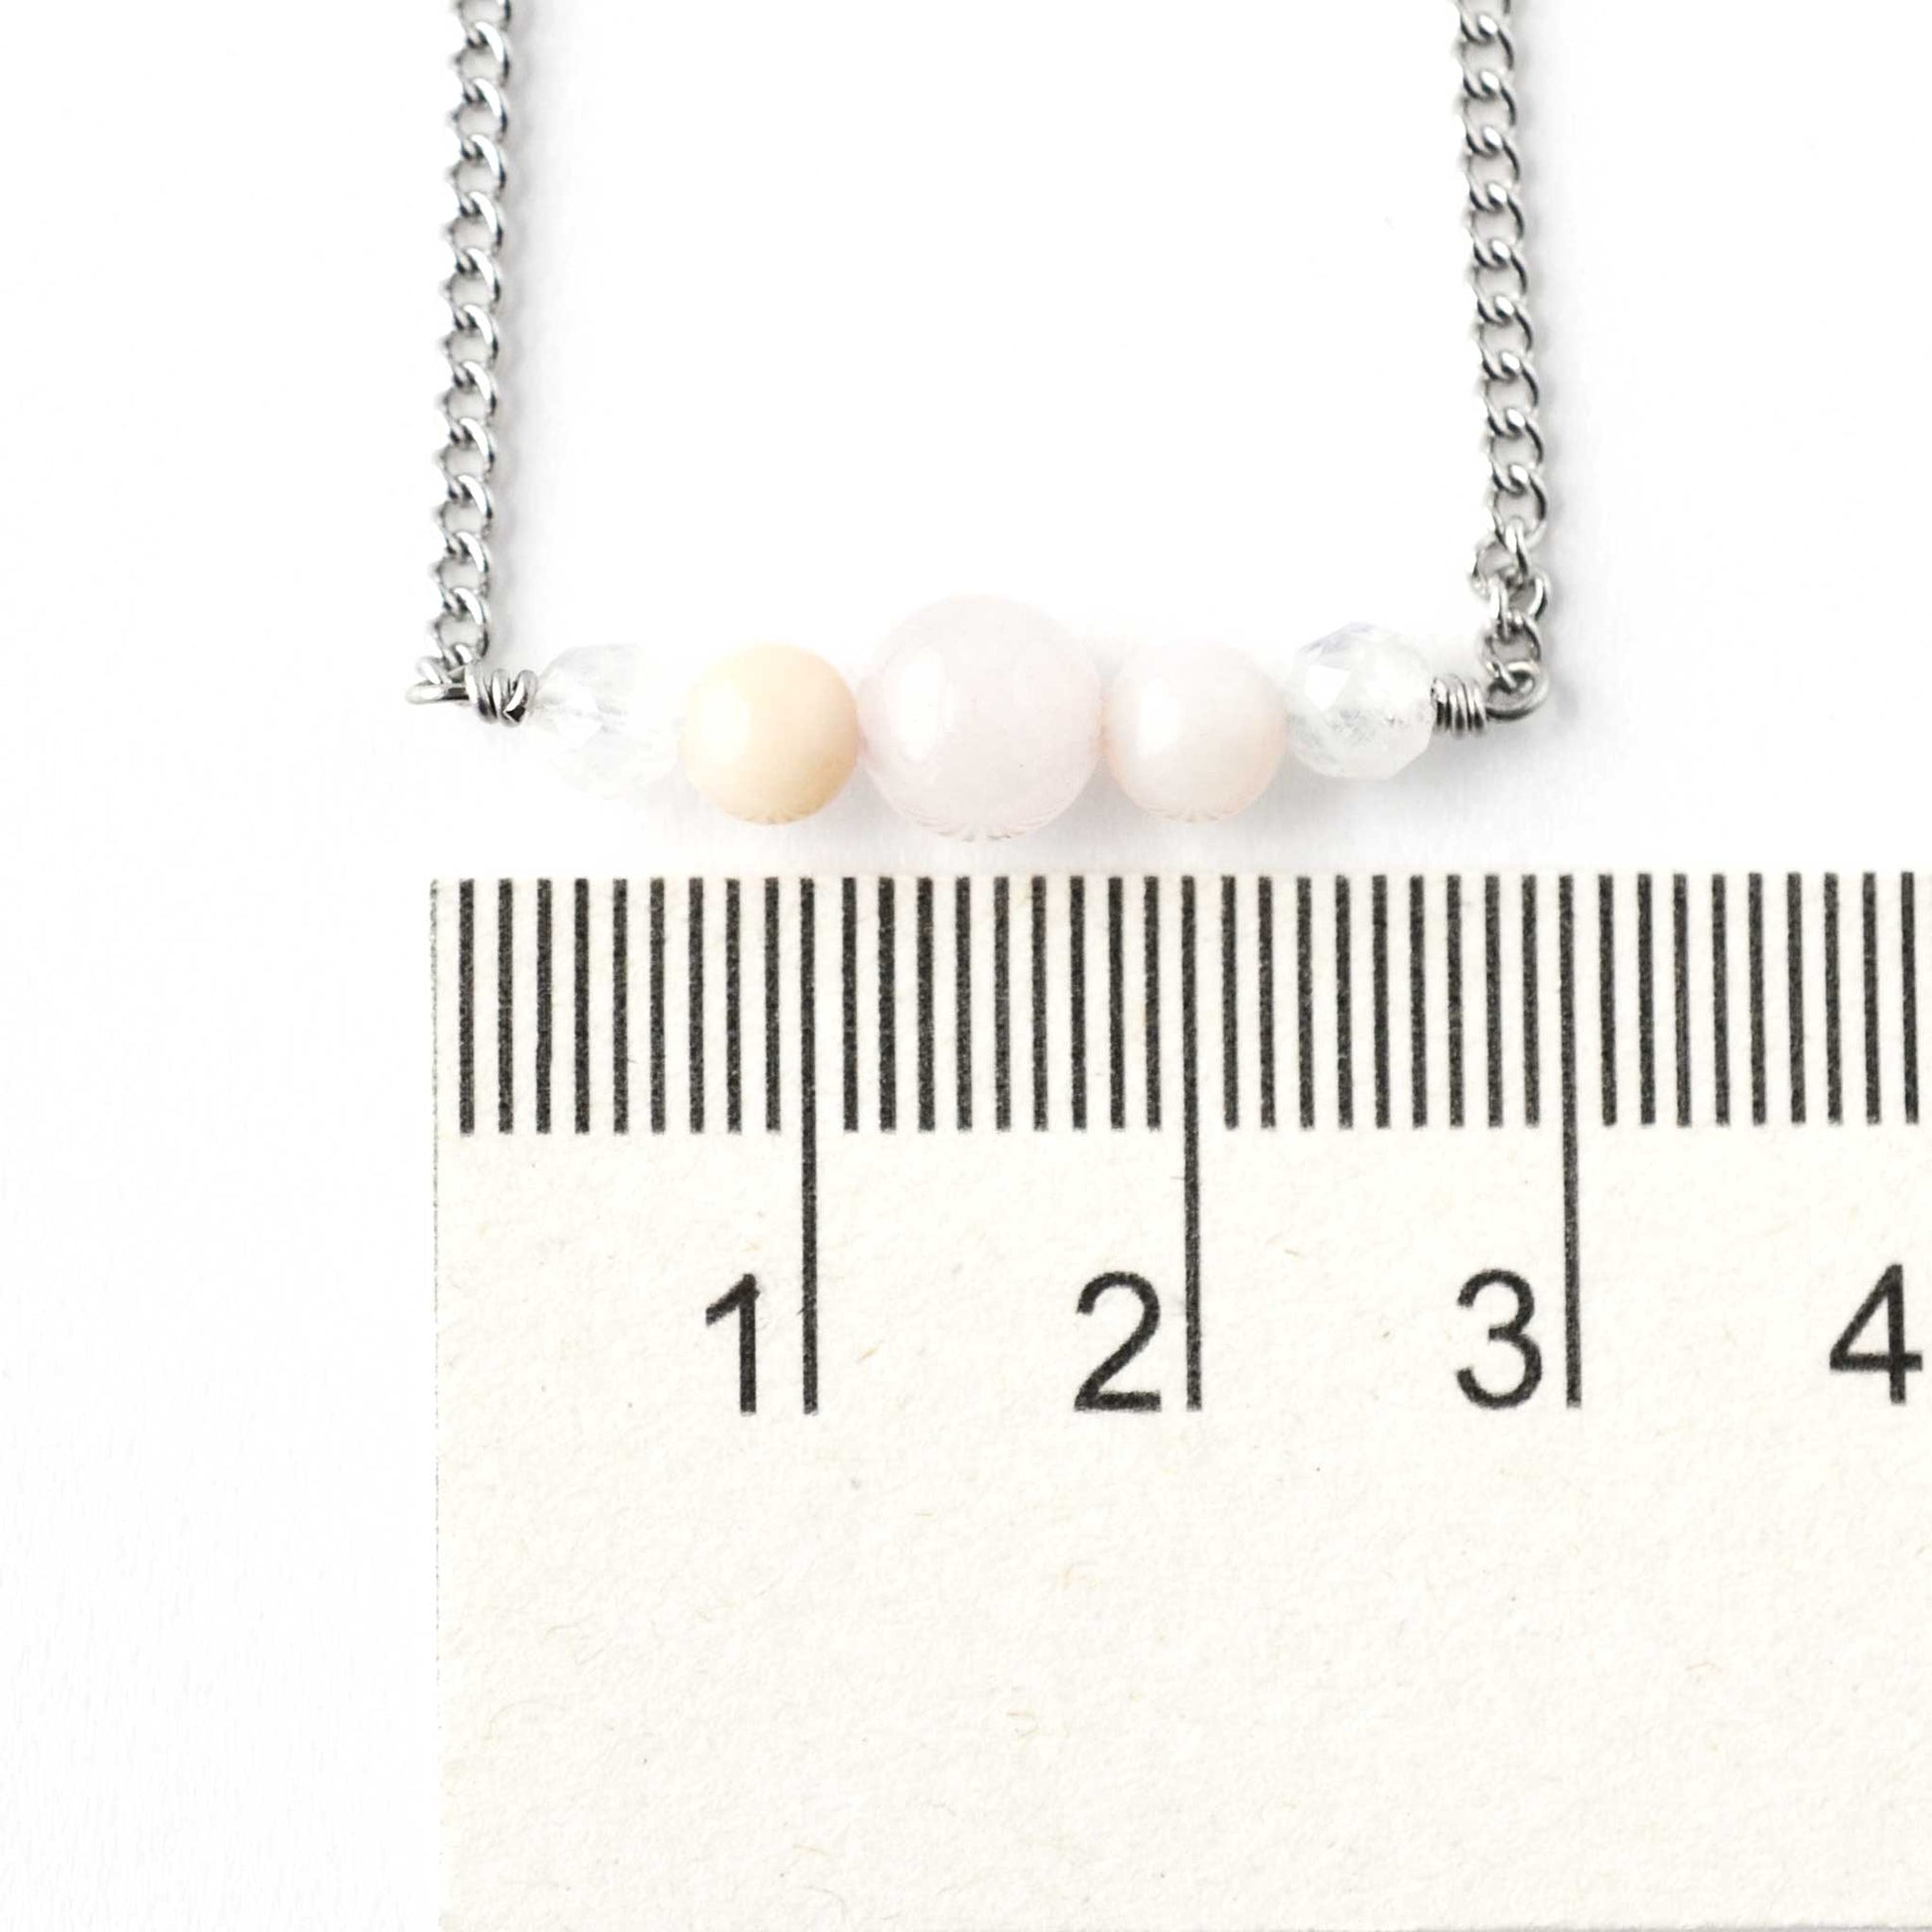 Dainty pale pink gemstone bar necklace next to ruler